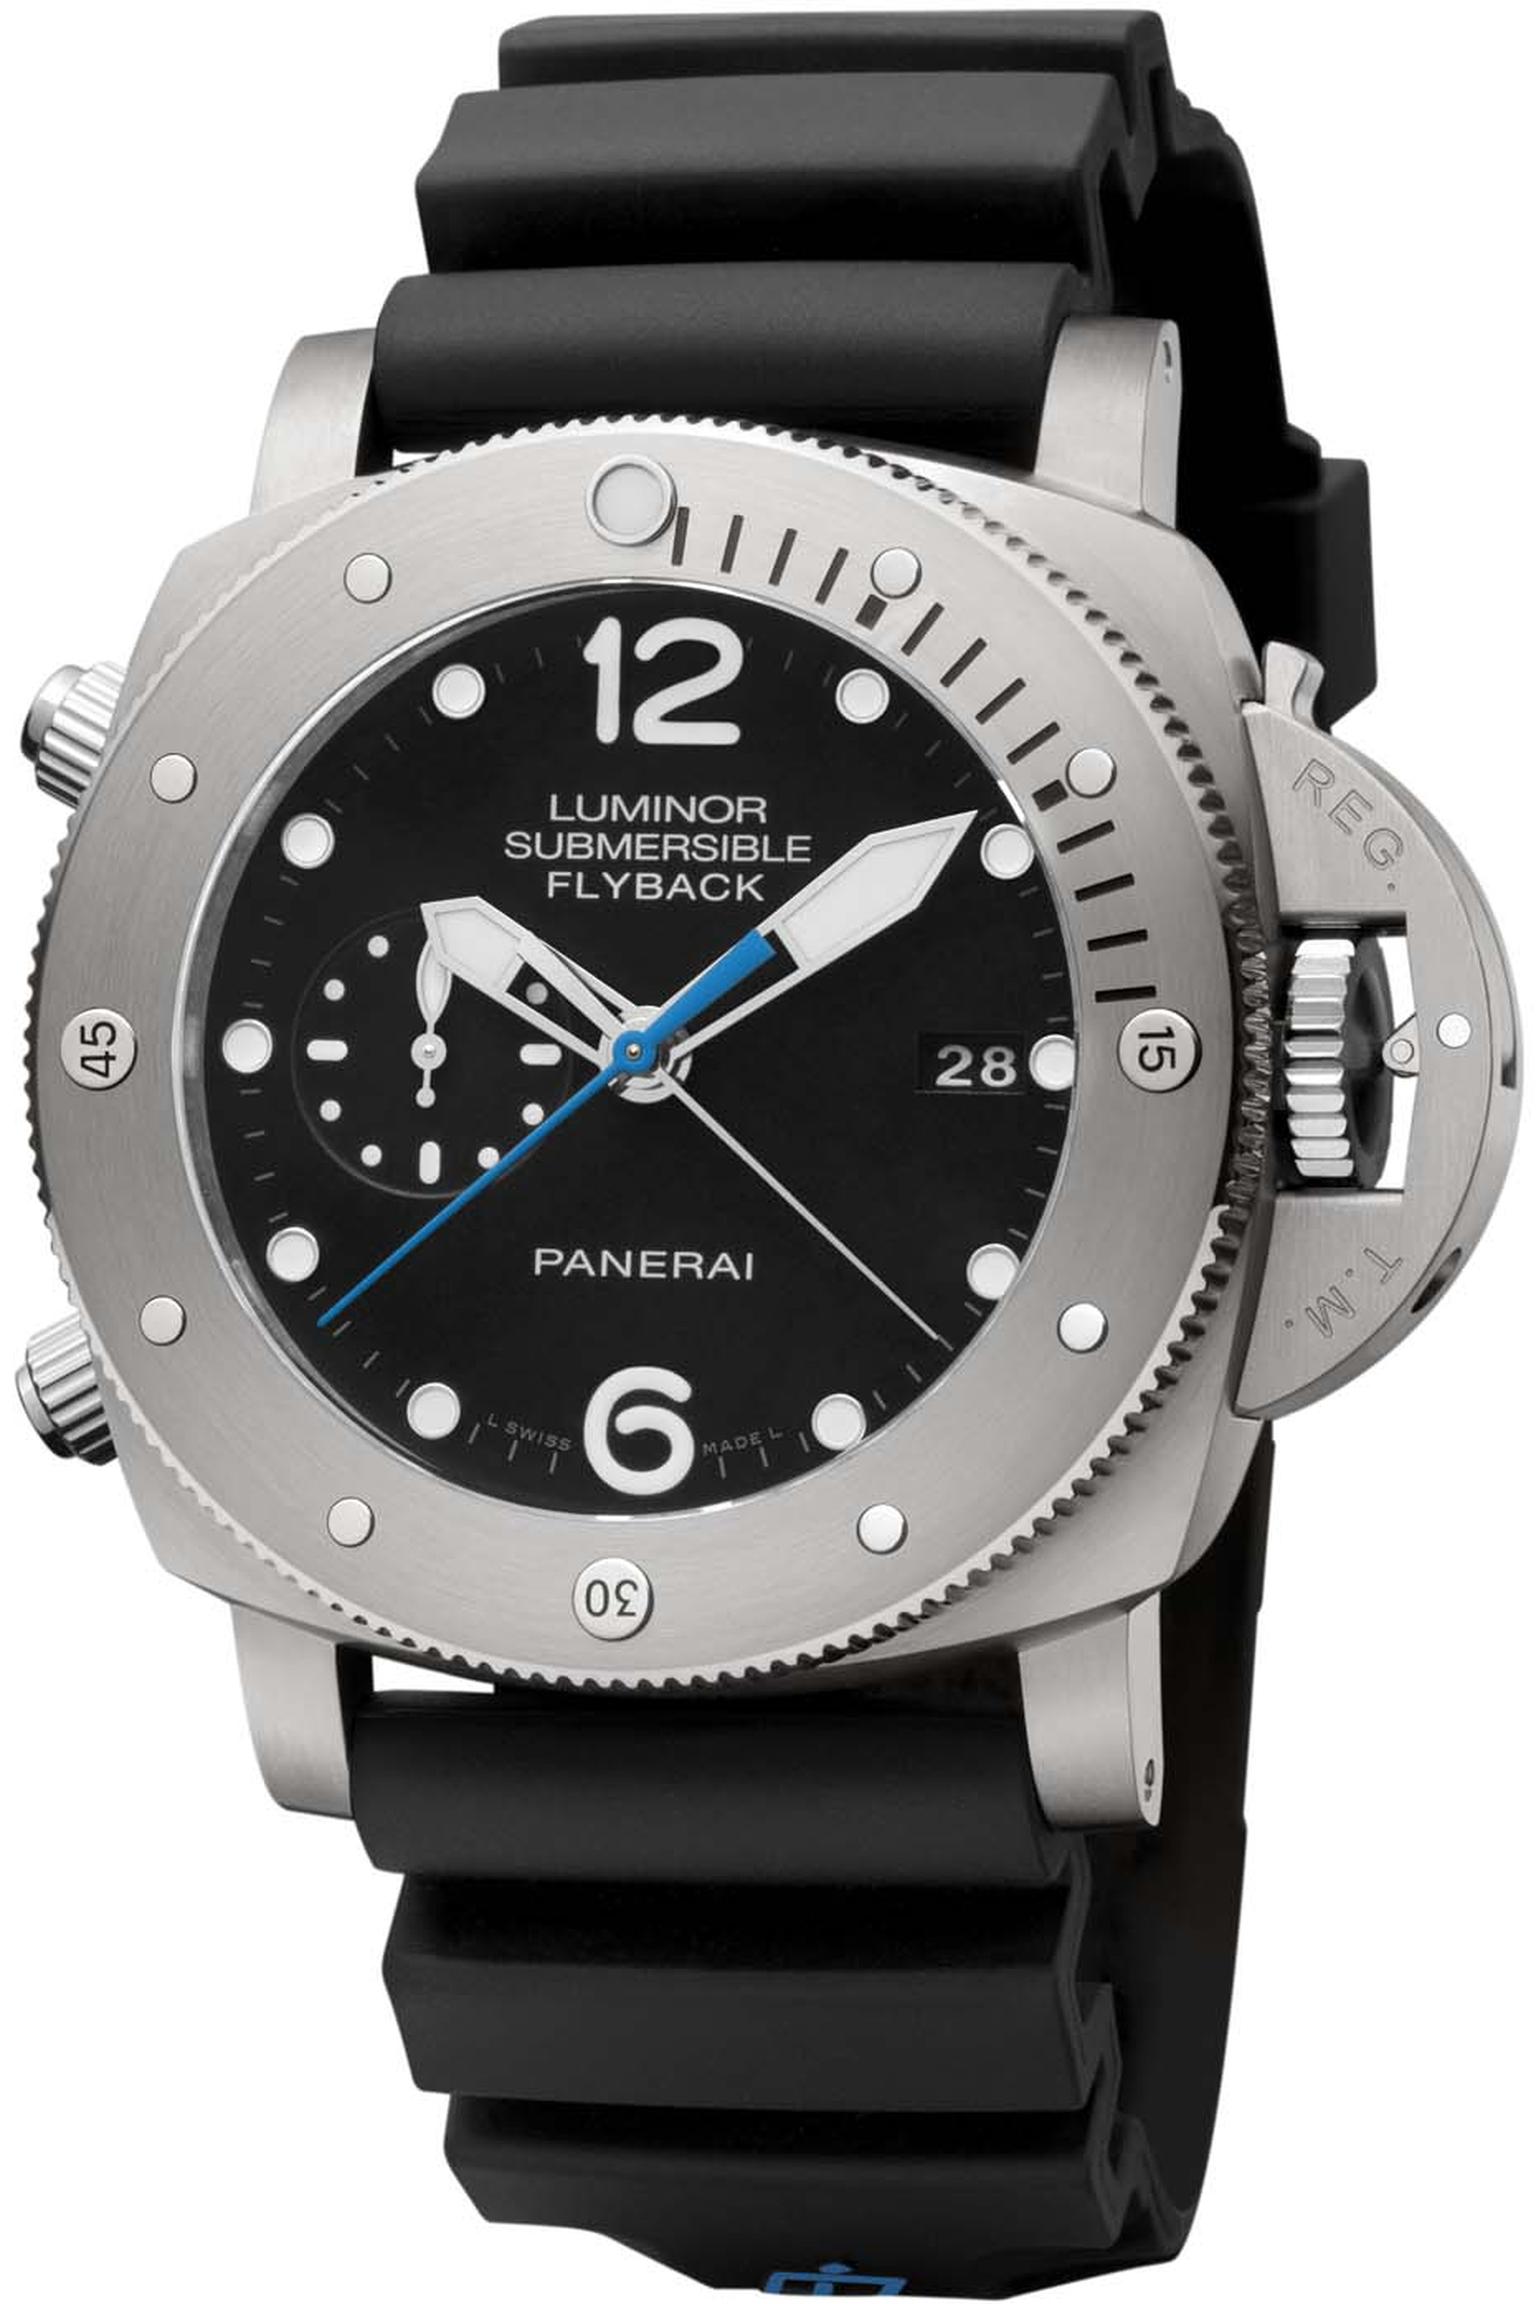 Panerai Luminor Submersible 1950 model with a flyback chronograph is equipped with an in-house mechanical automatic movement to power the hours, minutes, small seconds, date, calculation of immersion time, flyback chronograph and seconds reset. The 47mm b